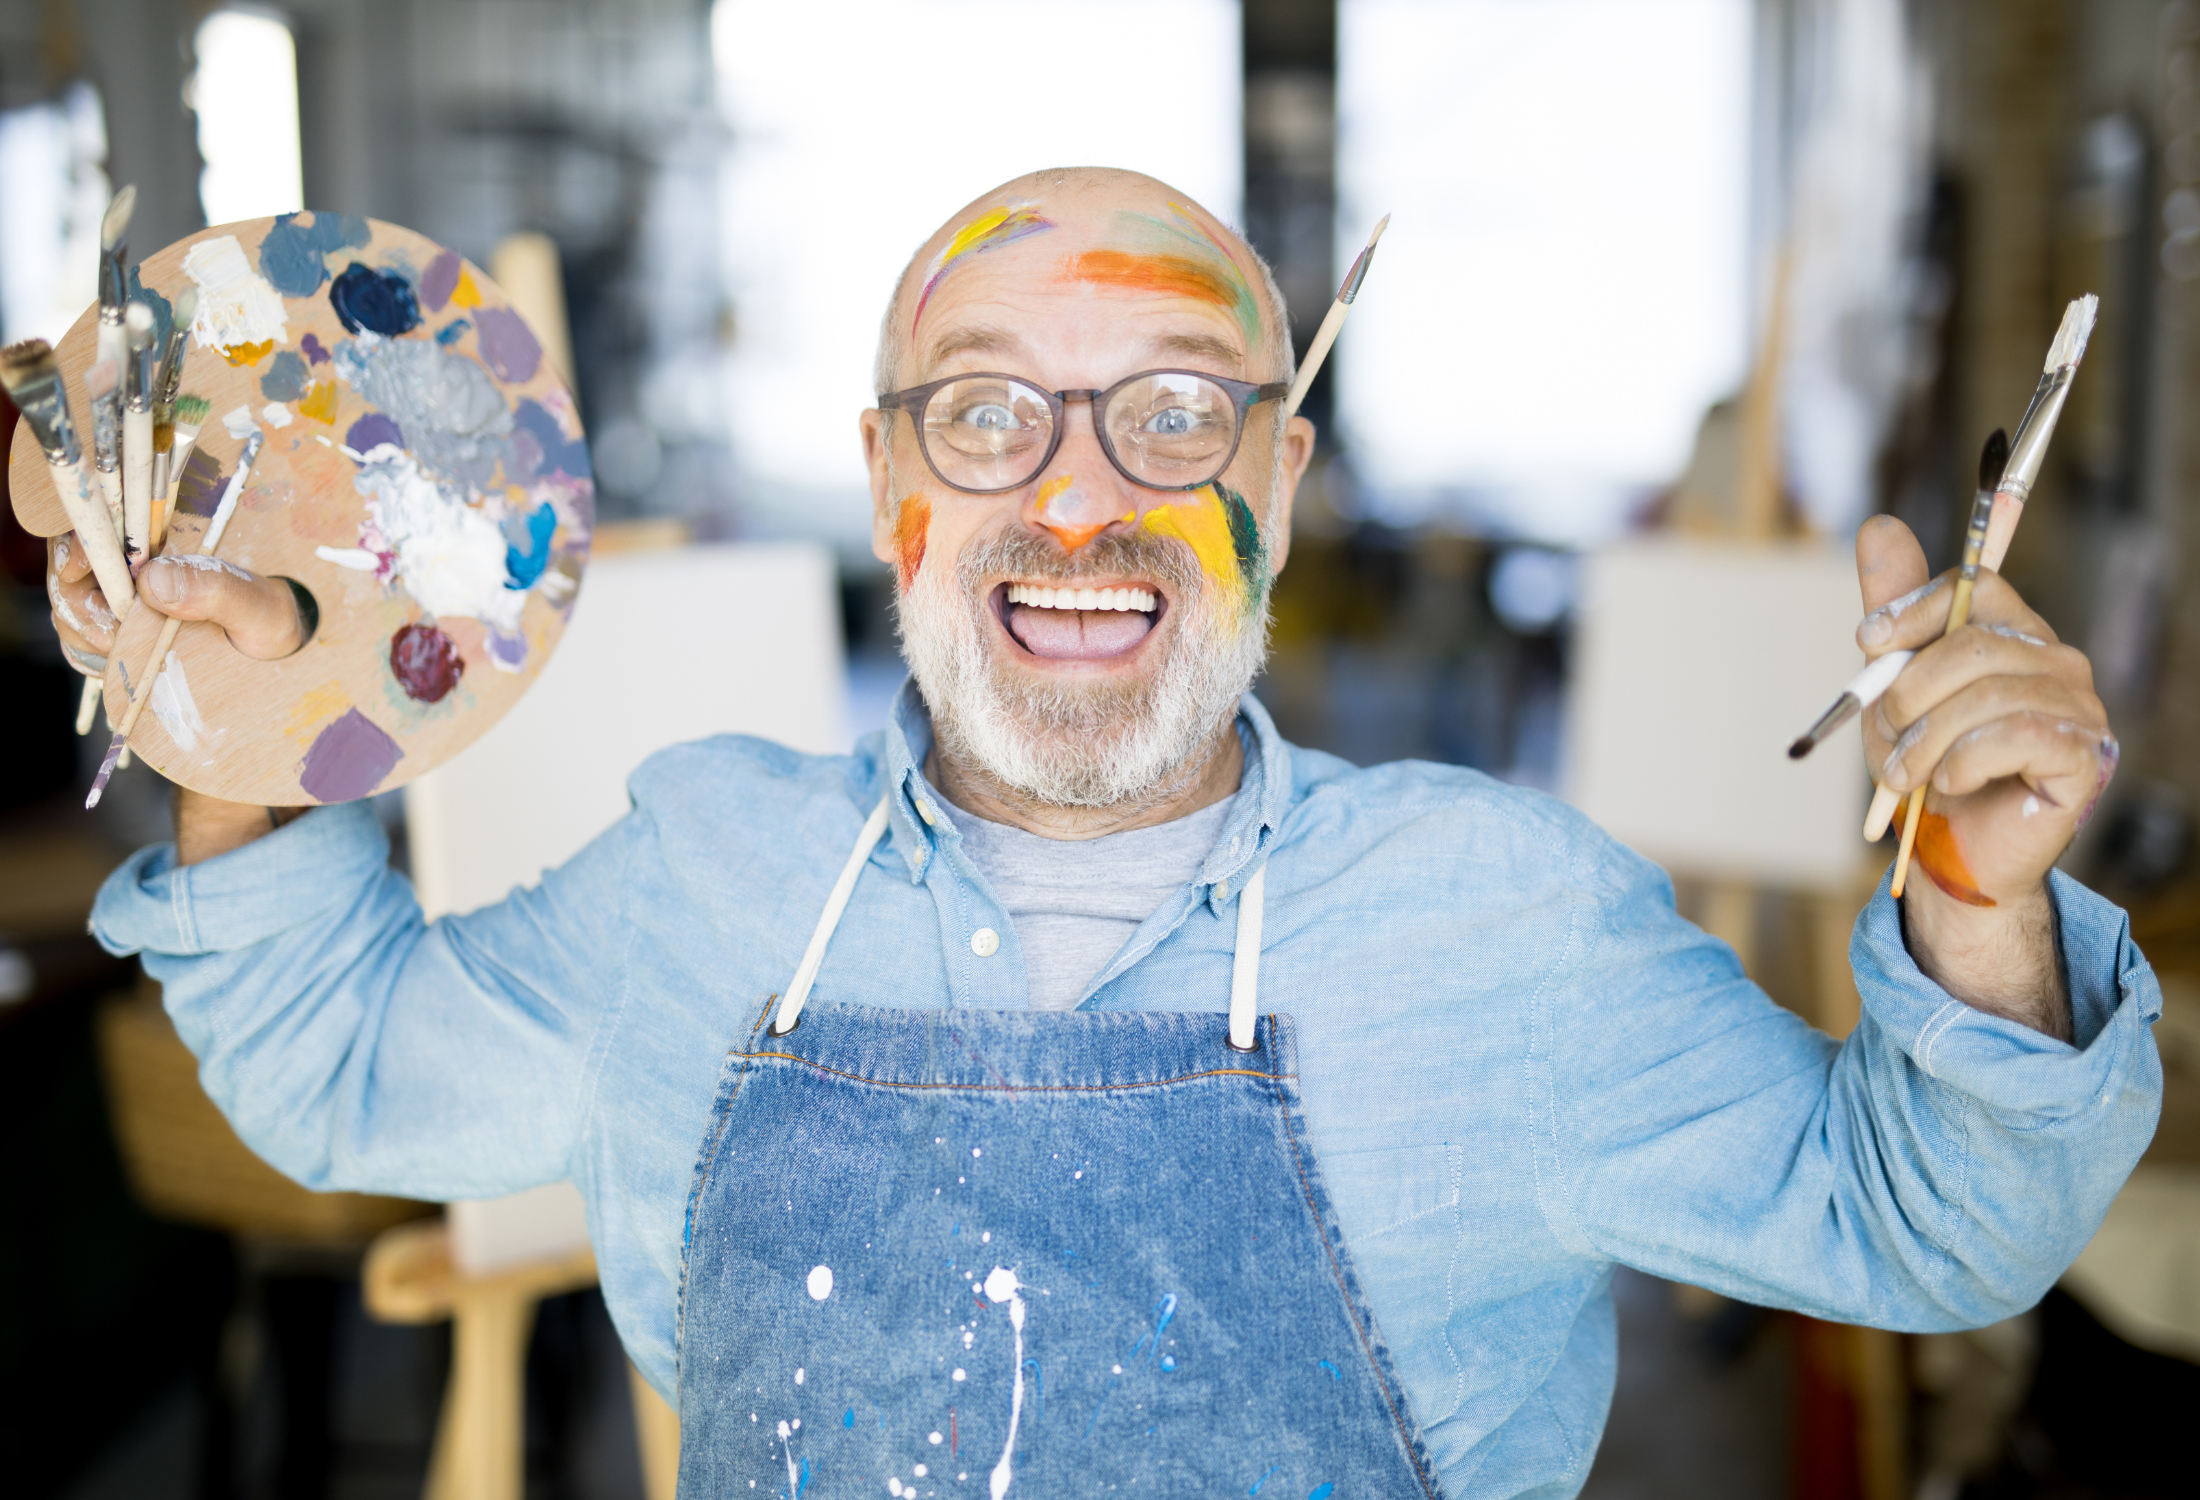 Image of a man holding paintbrushes and a palette and smiling